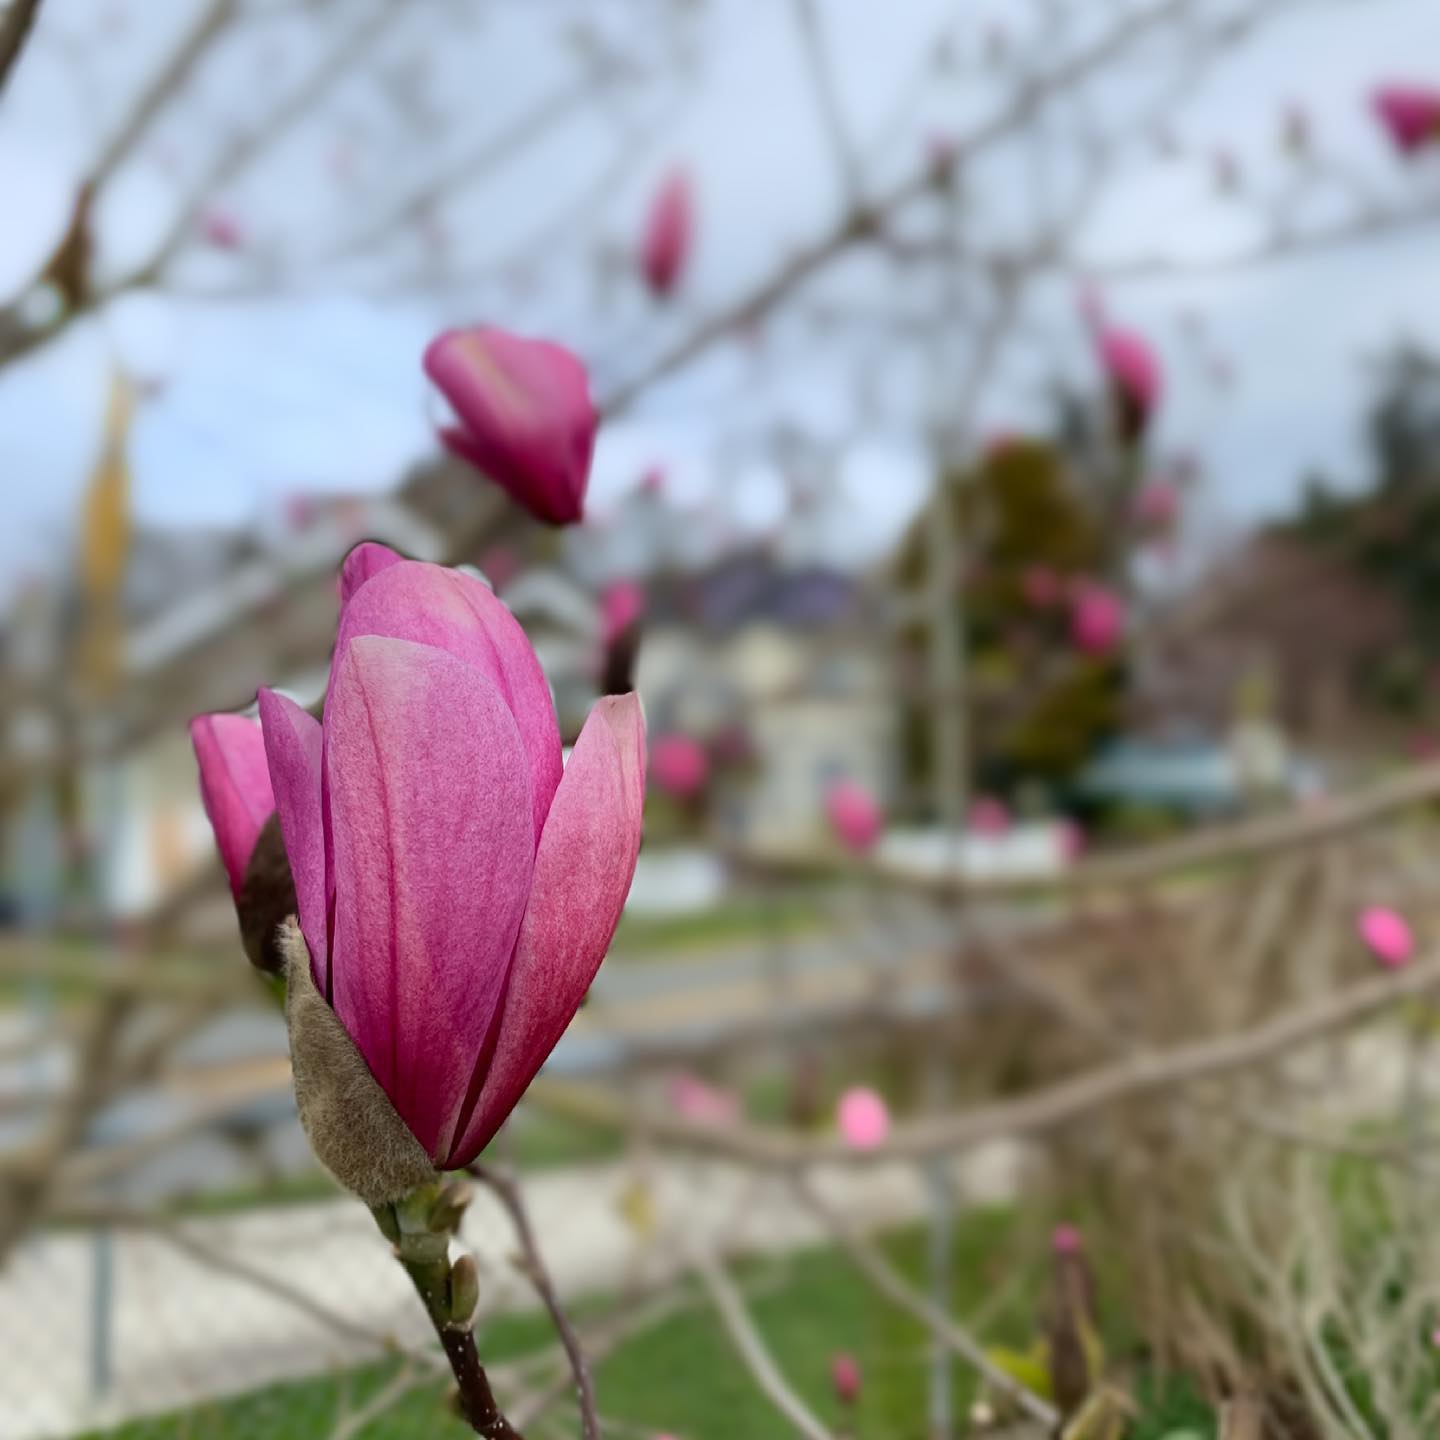 I love this time of year when the magnolias are starting to blossom. #trees #flowers #blossoms #esquimalt